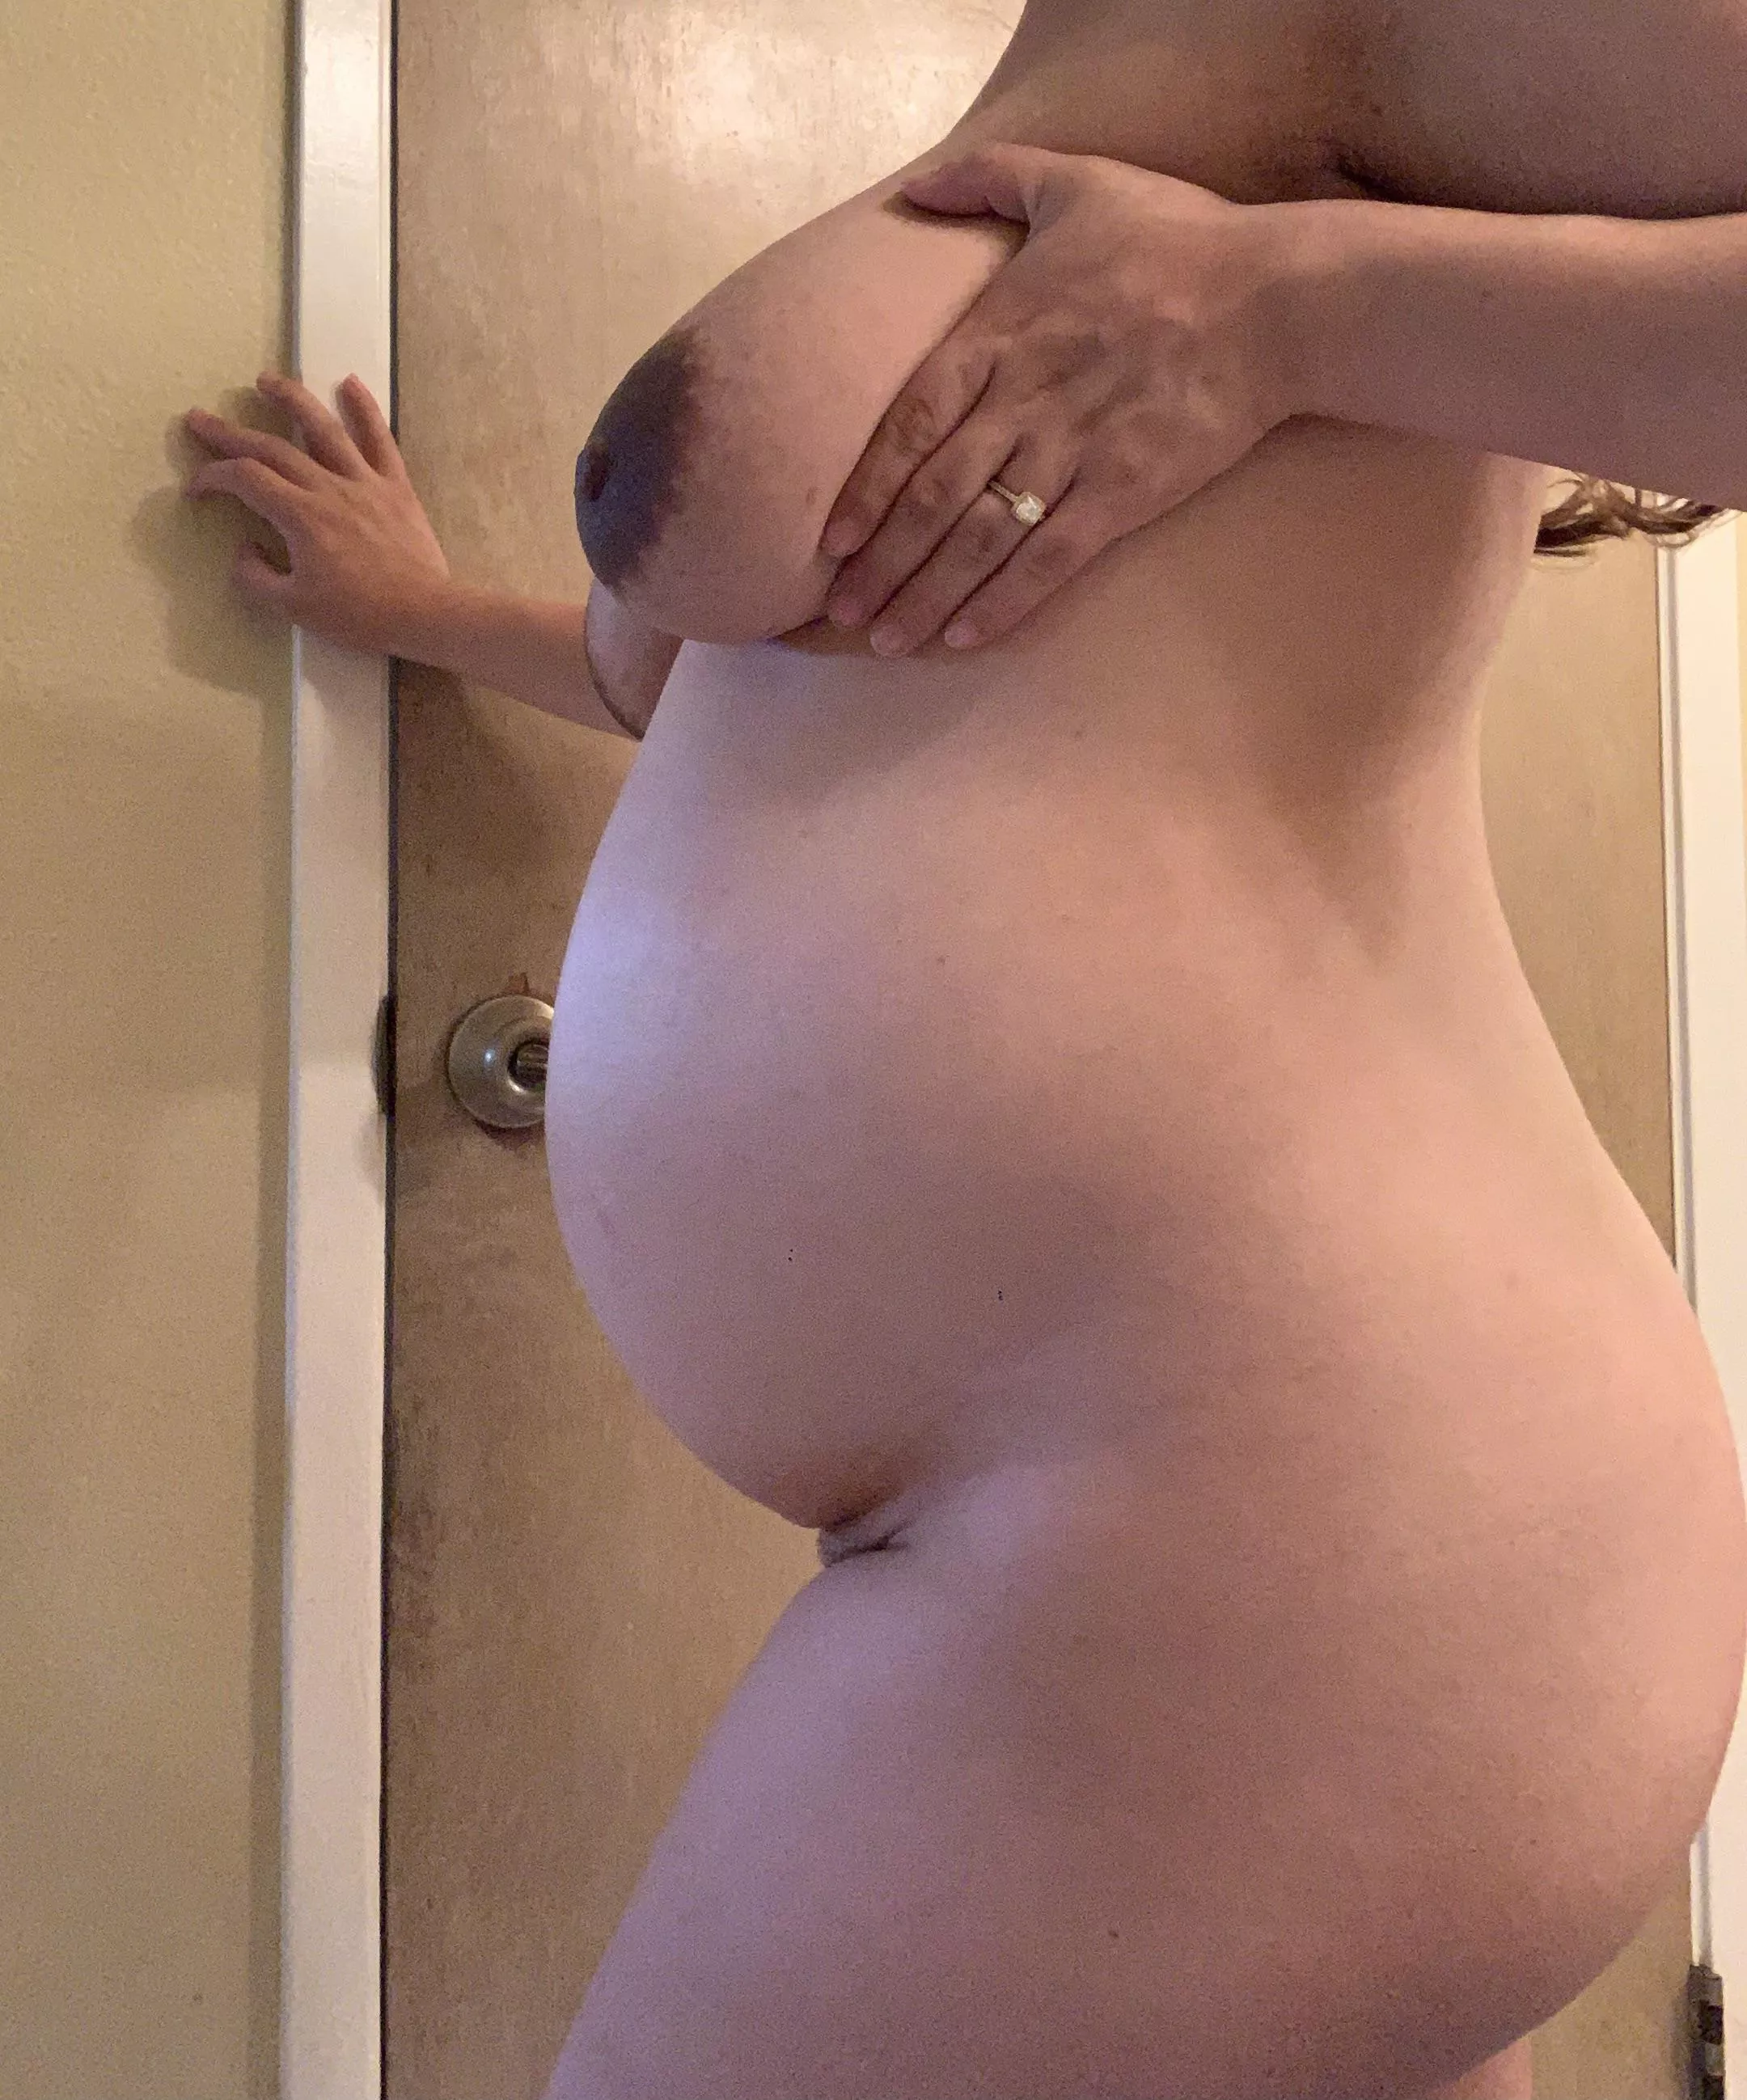 Fucking Pregnant Nude - 8 months pregnant would you still fuck me ðŸ¥µ nudes | GLAMOURHOUND.COM